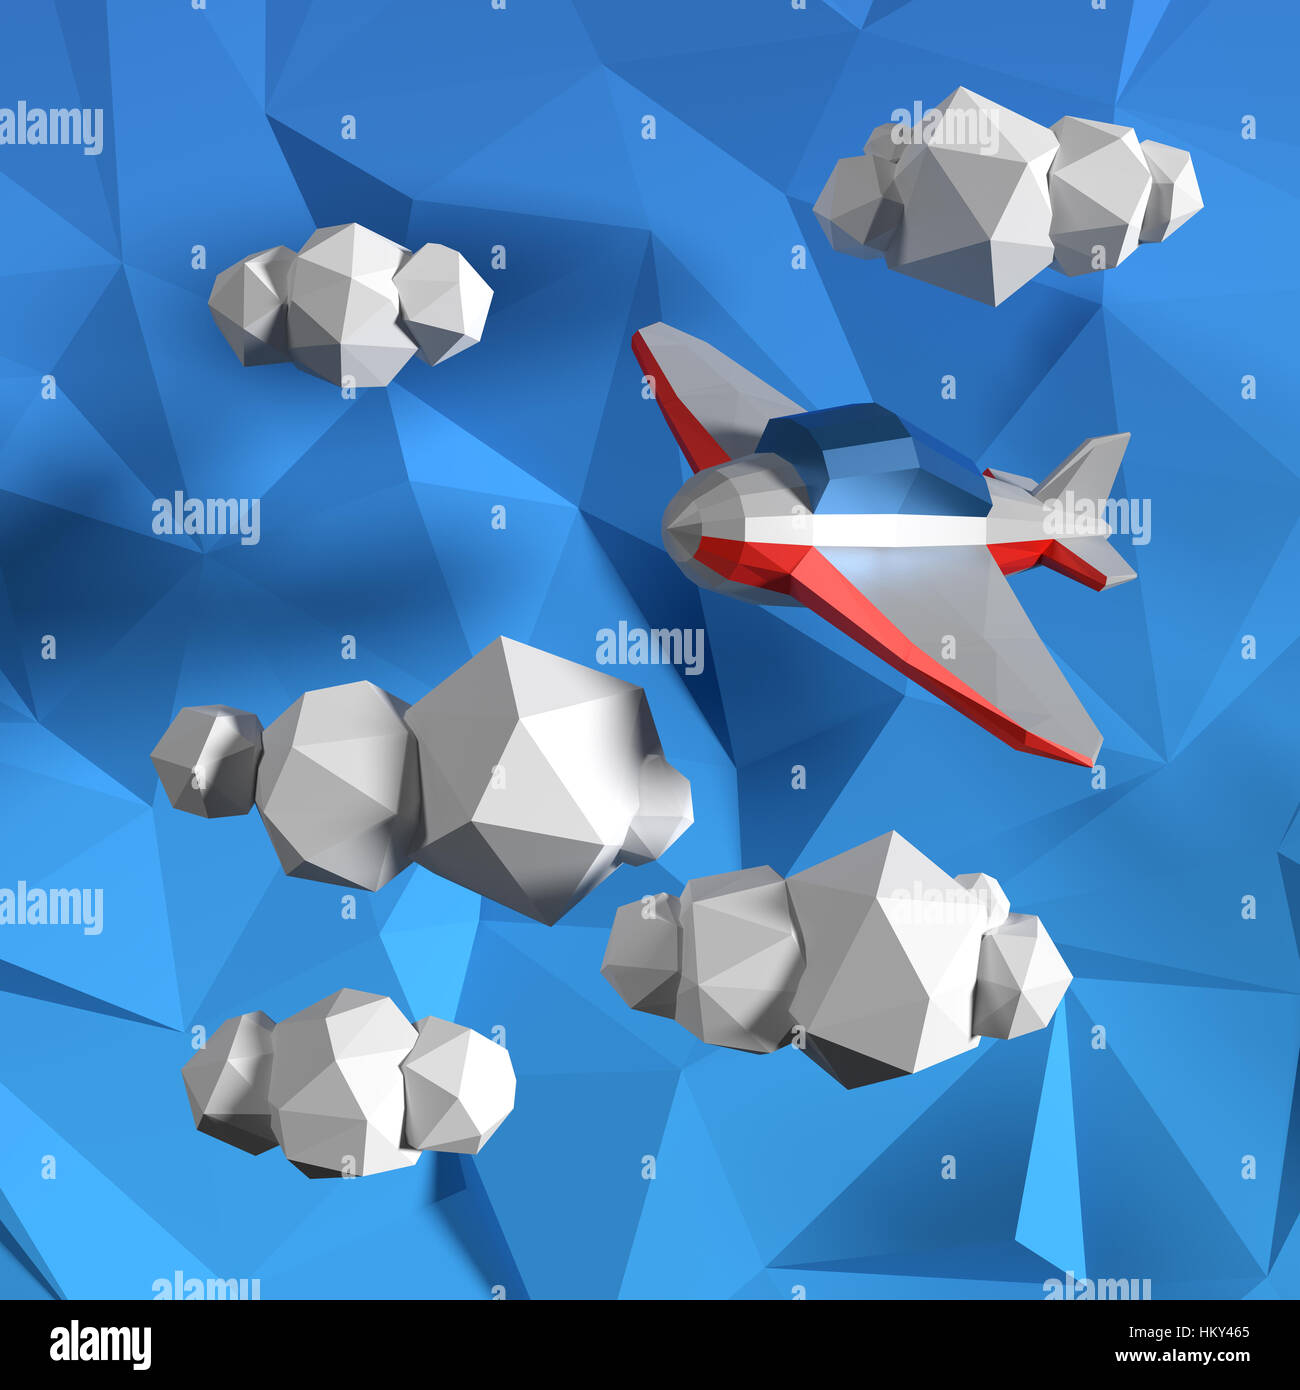 Low poly sky with clouds and small airplane. Stock Photo